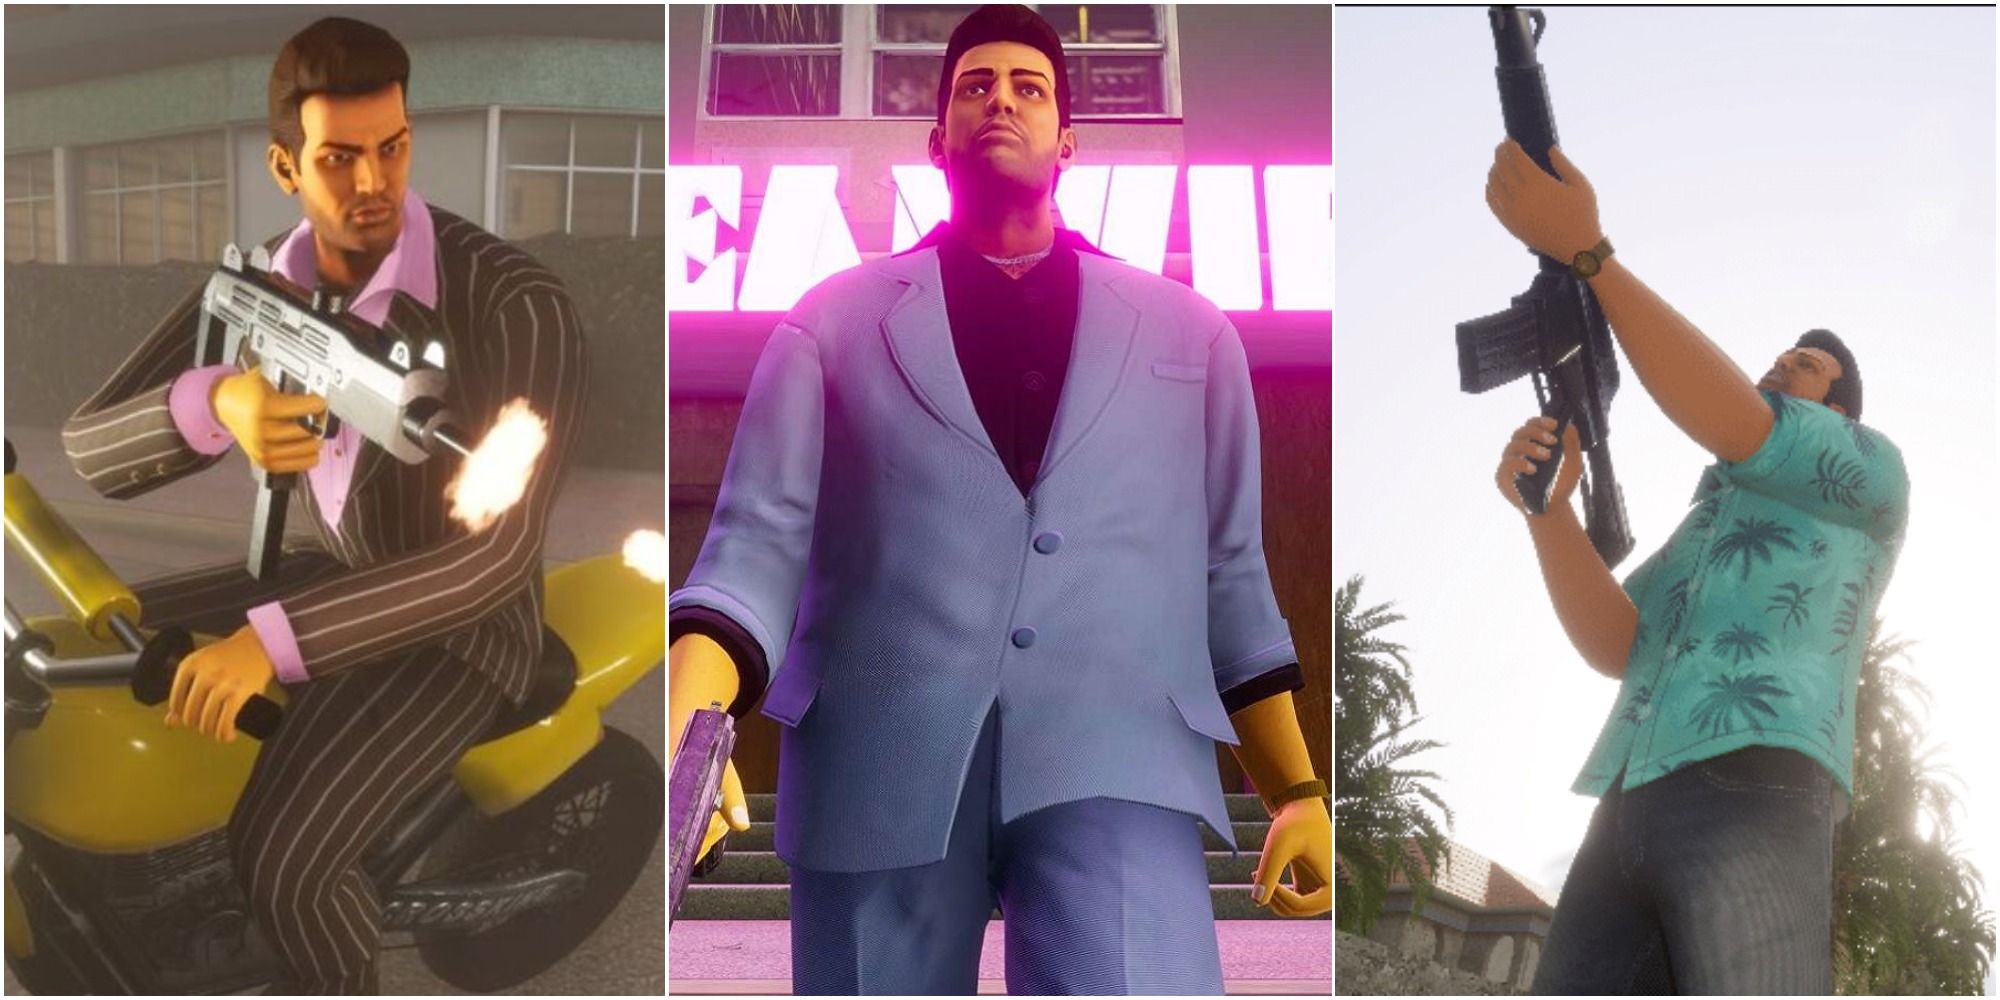 Grand Theft Auto Vice City How To Unlock Each Outfit And Where To Find Them